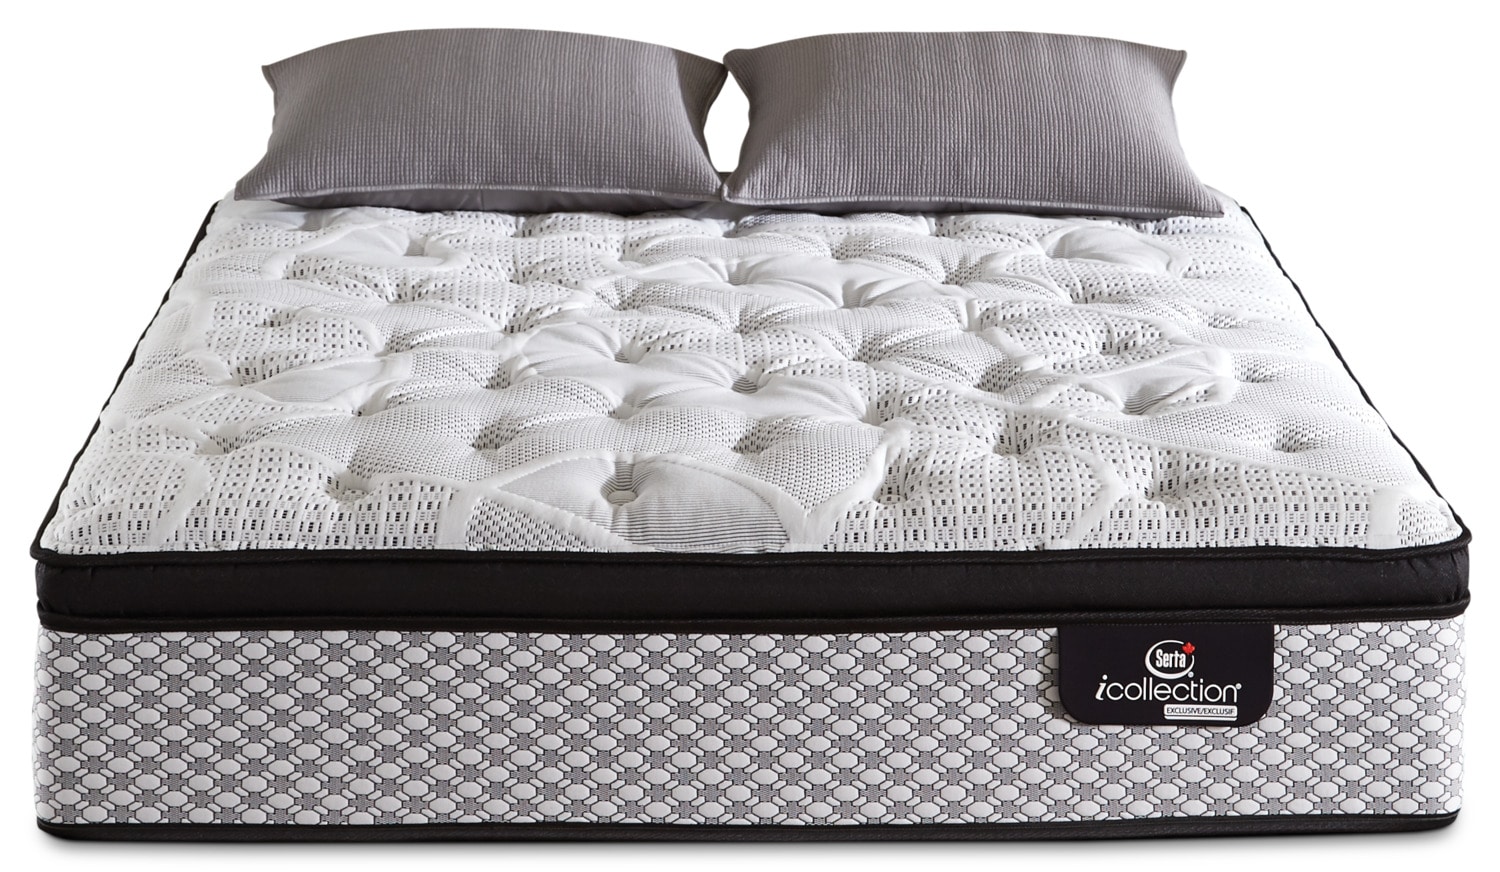 Uncover 66+ Inspiring the brick twin mattress Voted By The Construction Association